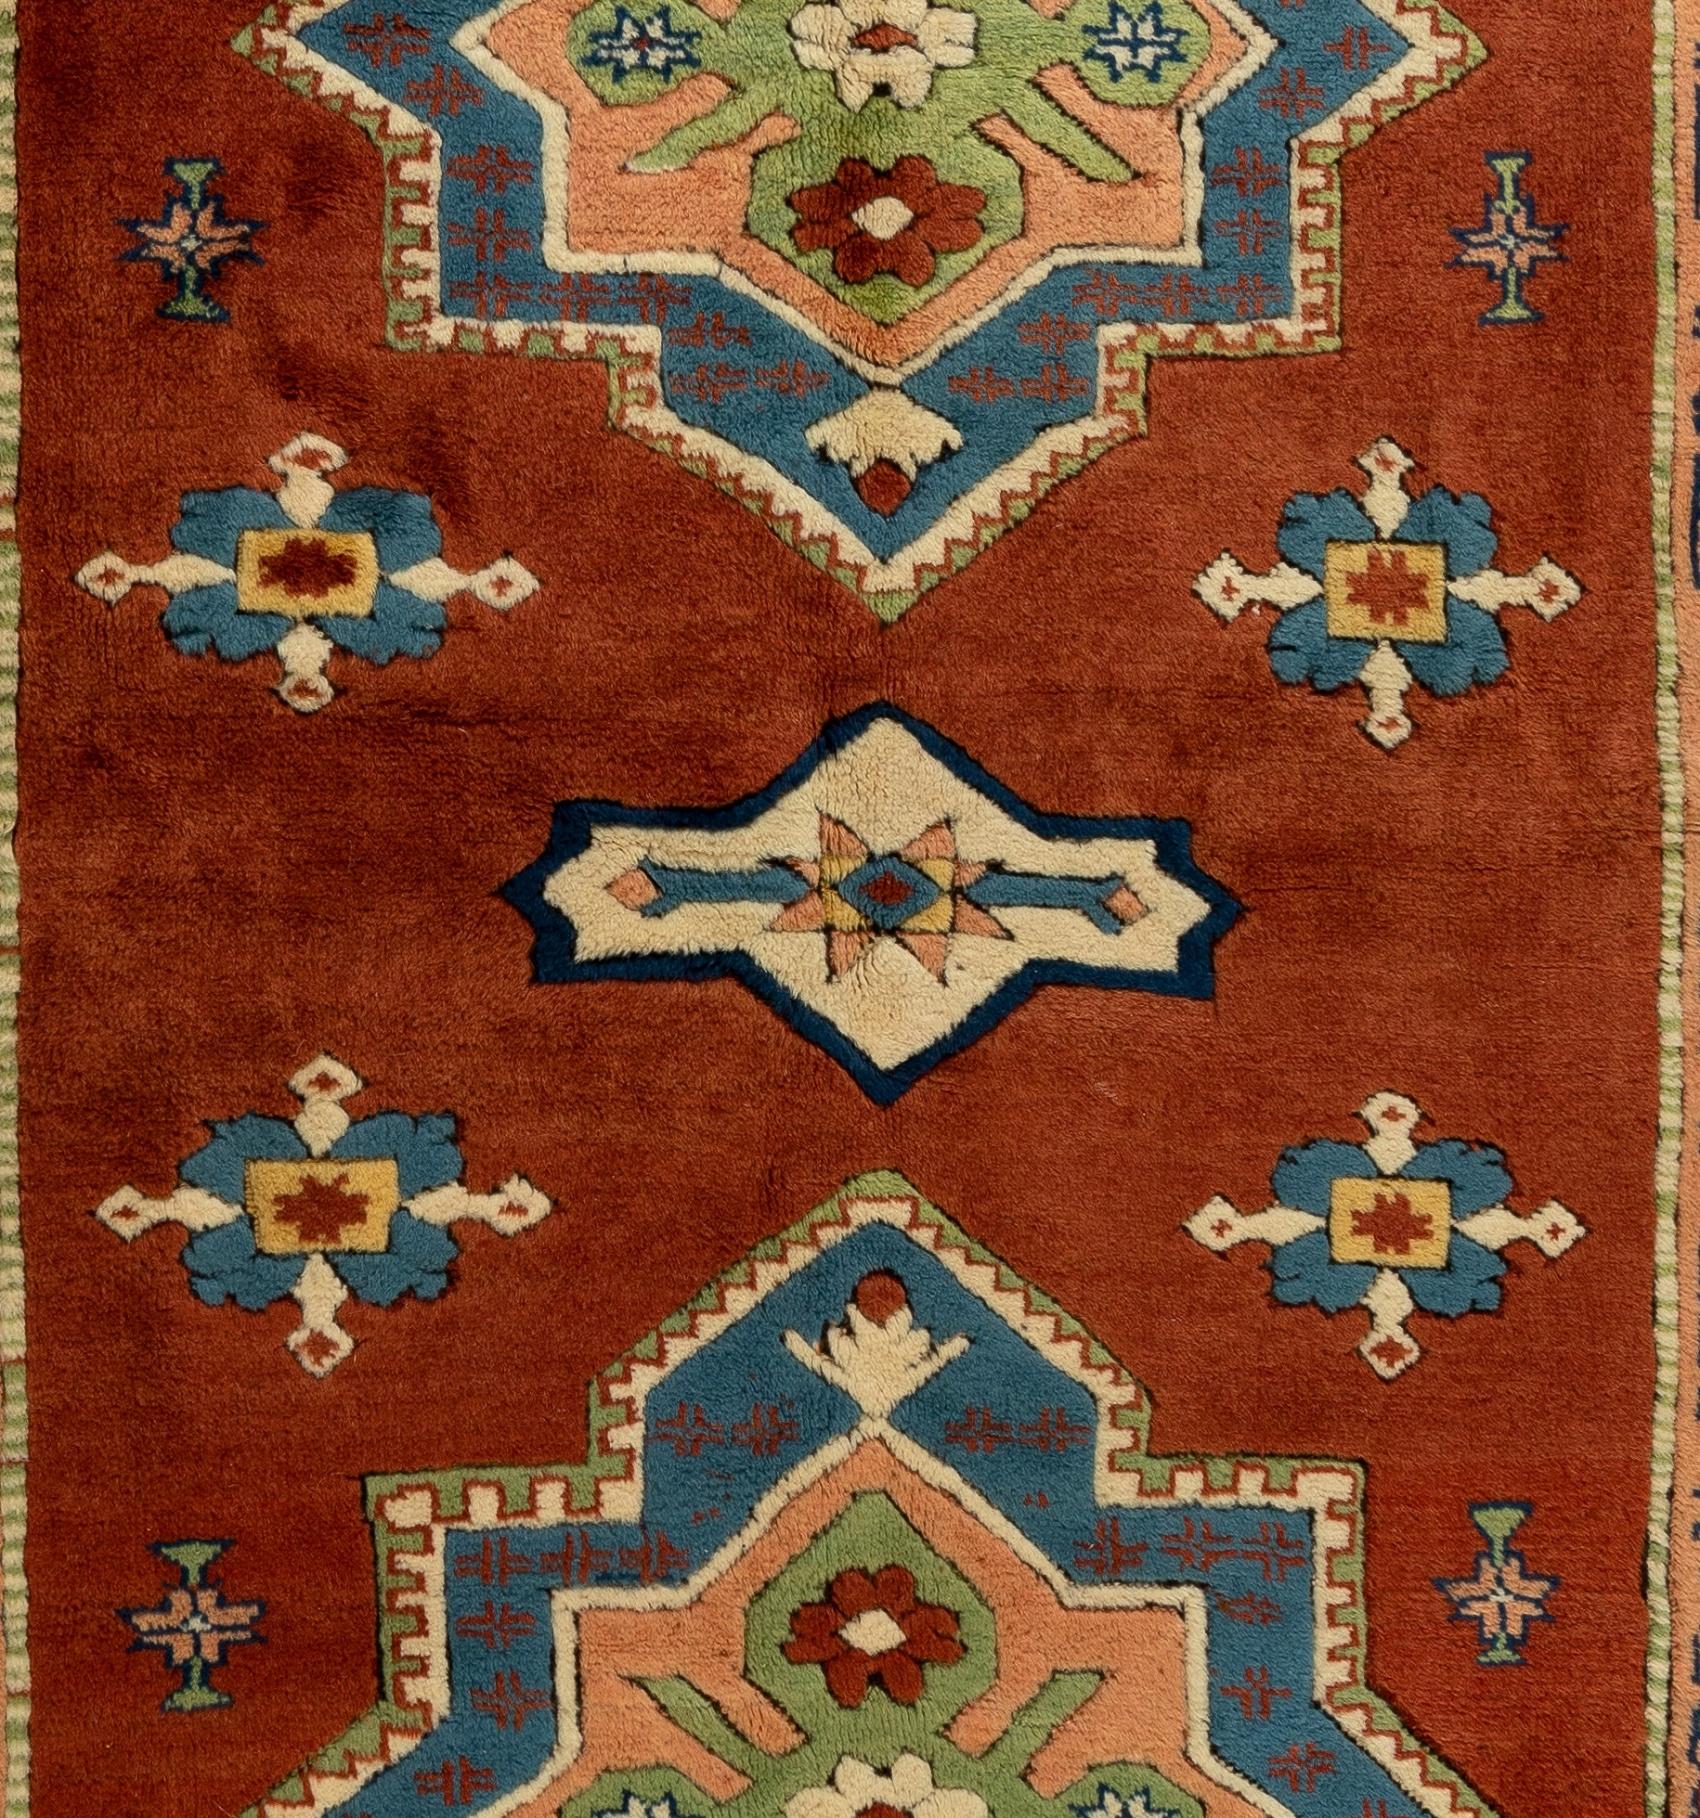 Contemporary 6x8 Ft New Hand Made Turkish Area Rug in Red & Beige. All Wool, Soft Medium Pile For Sale